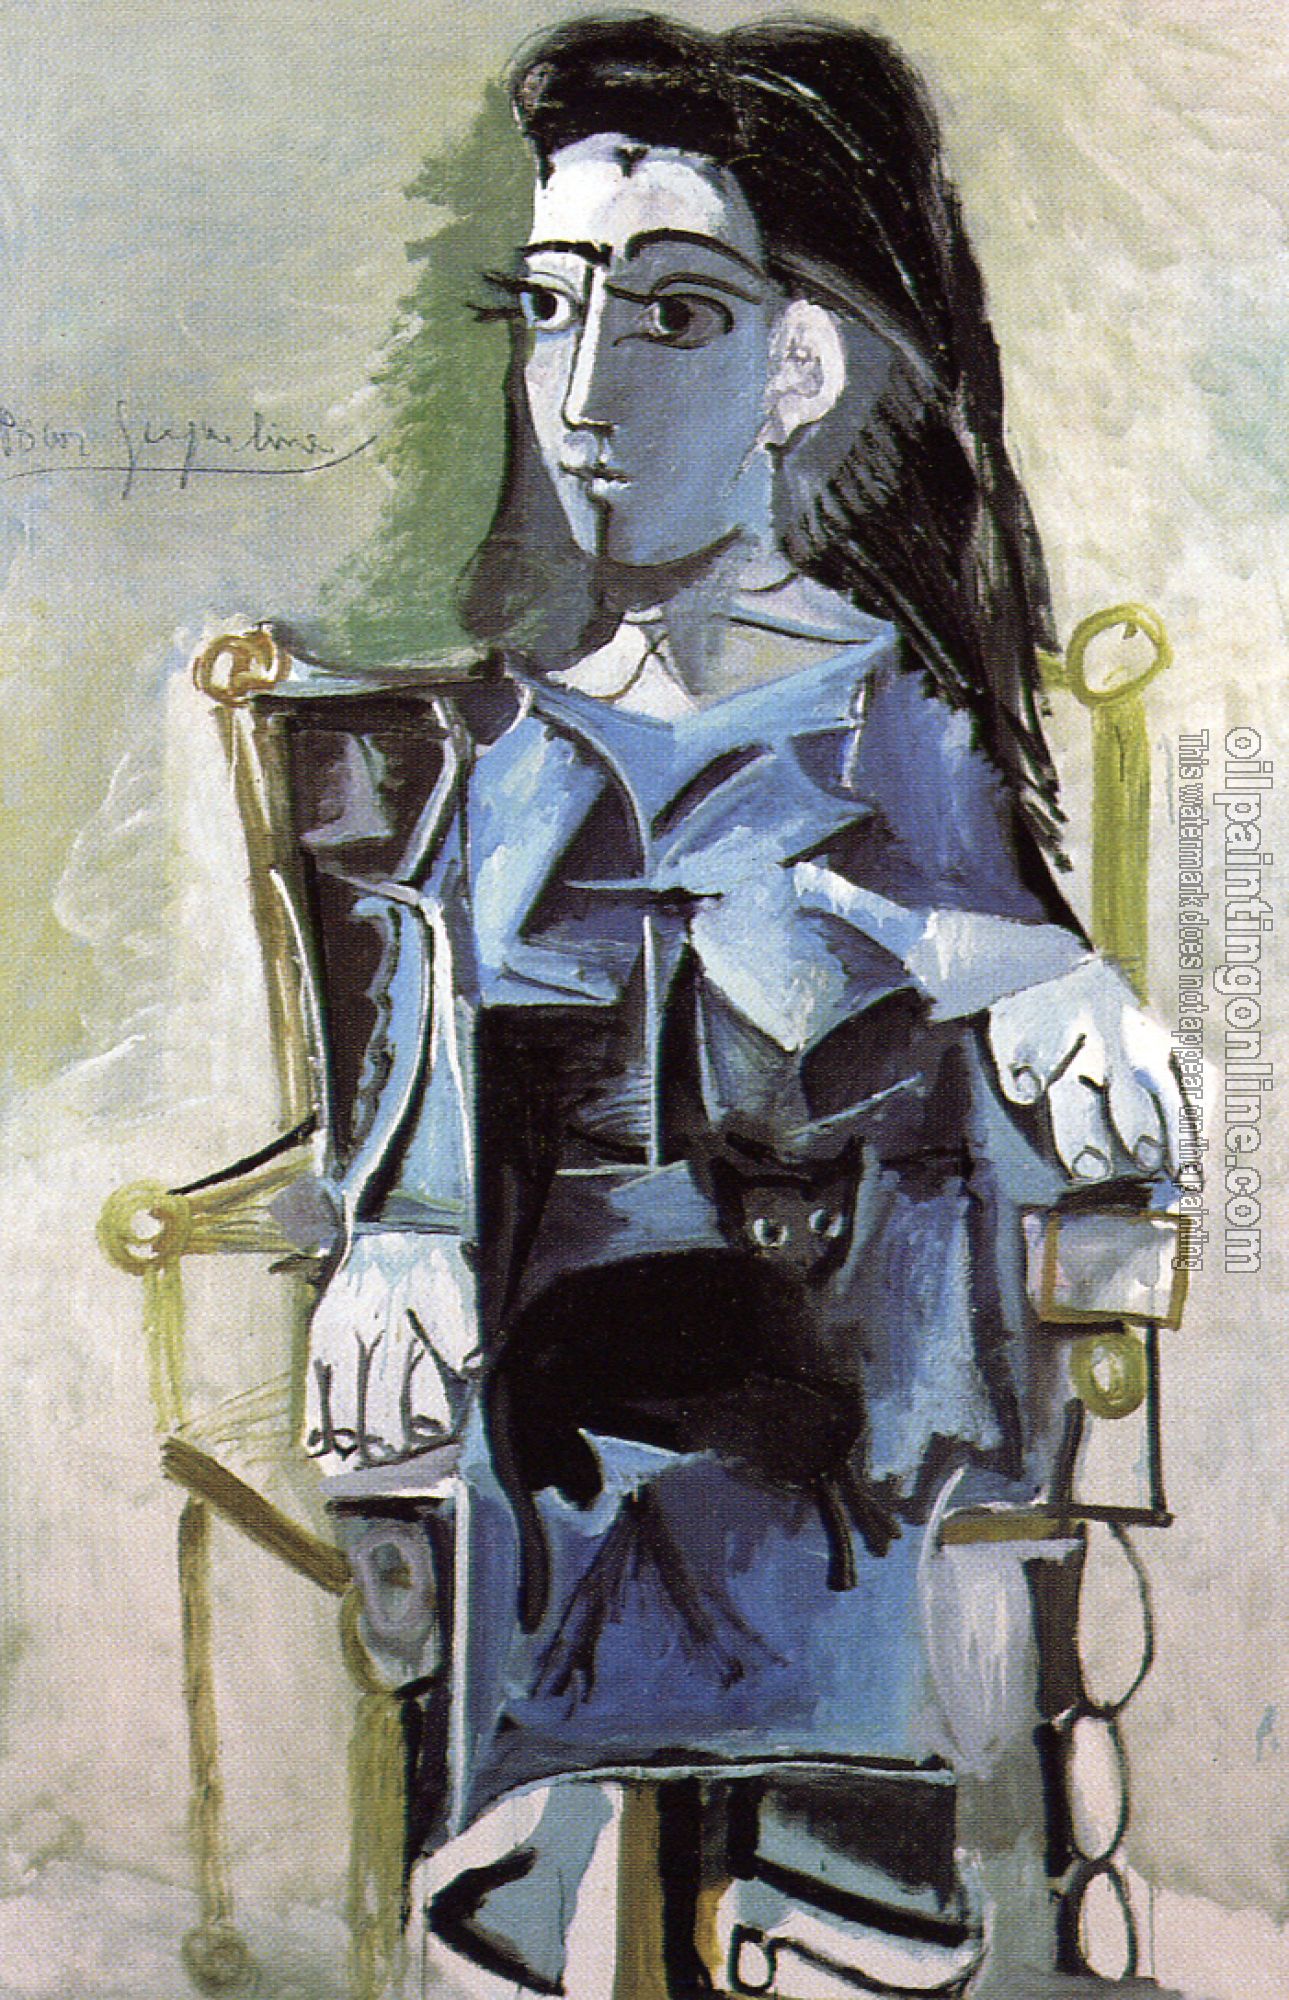 Picasso, Pablo - jacqueline seated with her black cat